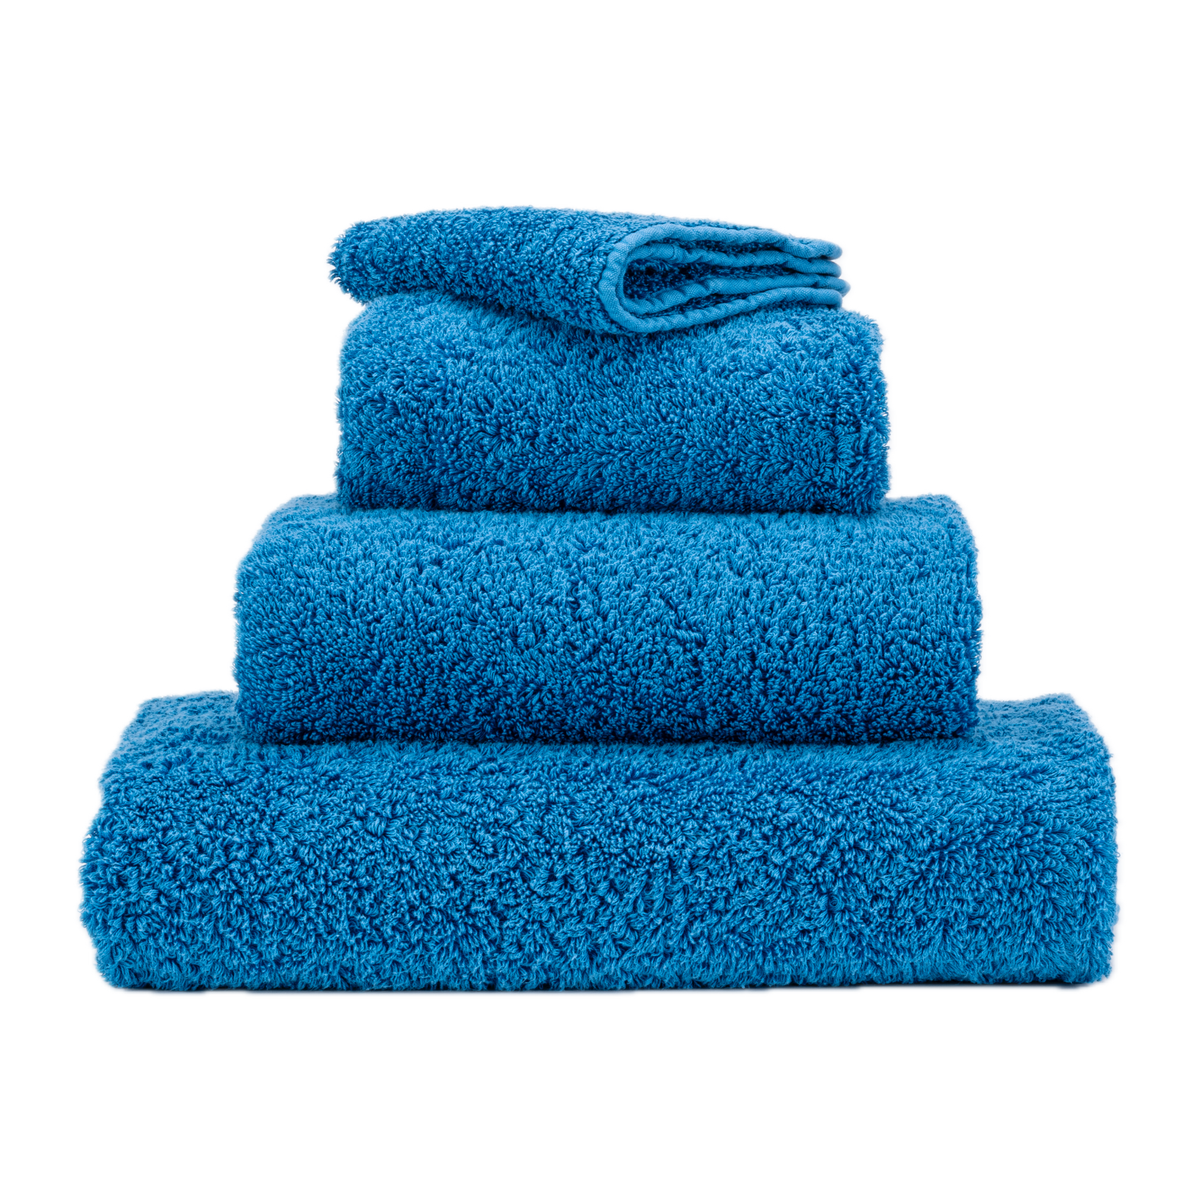 Stack of Abyss Super Pile Bath Towels in Ocean Color